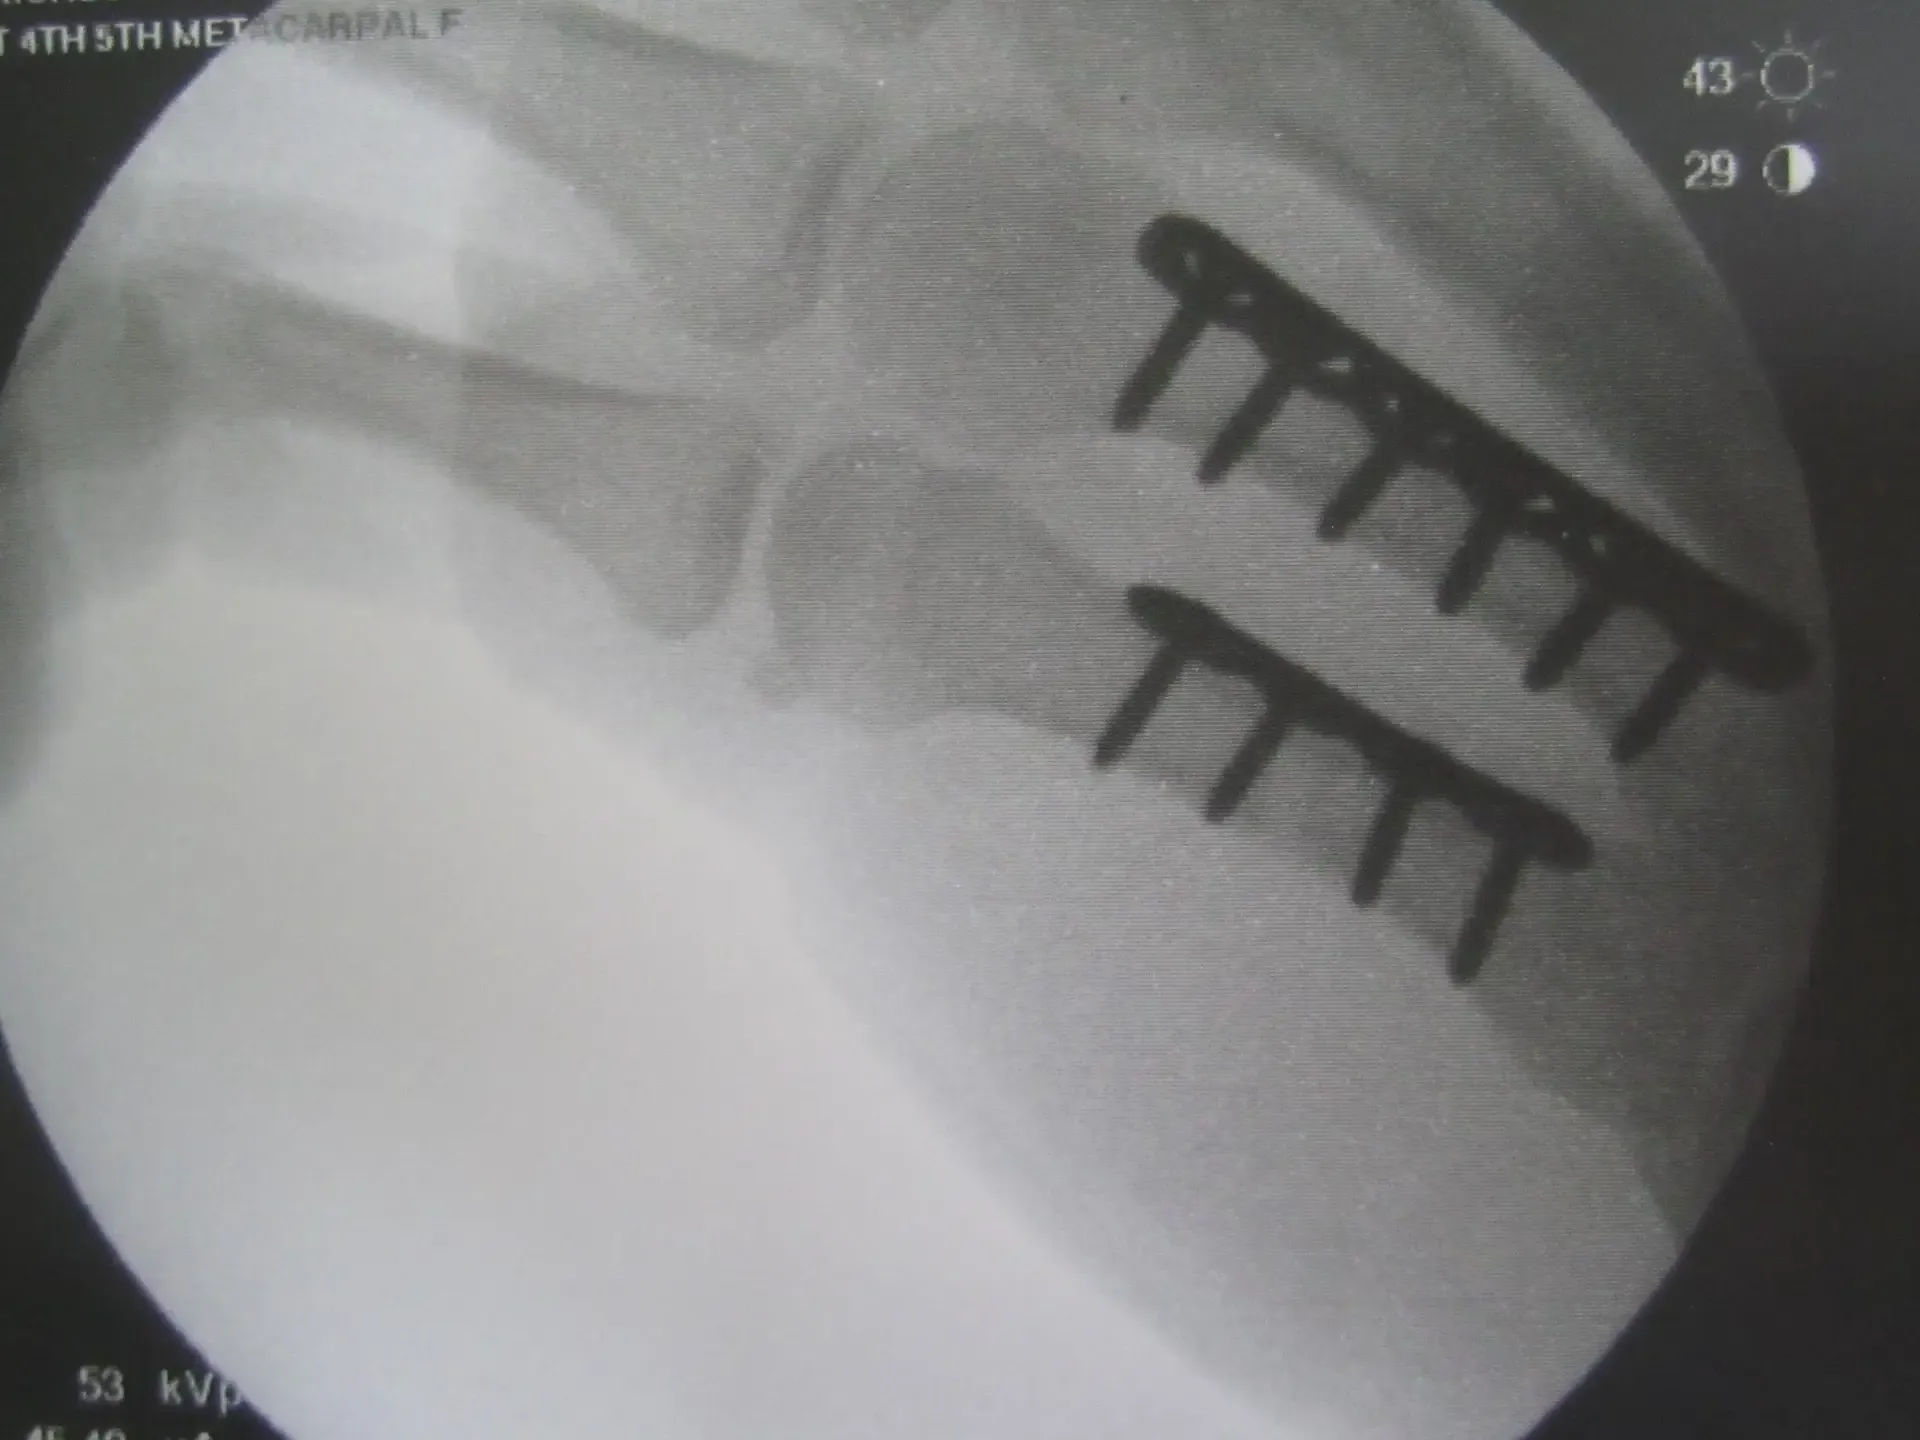 4th and 5th metacarpals